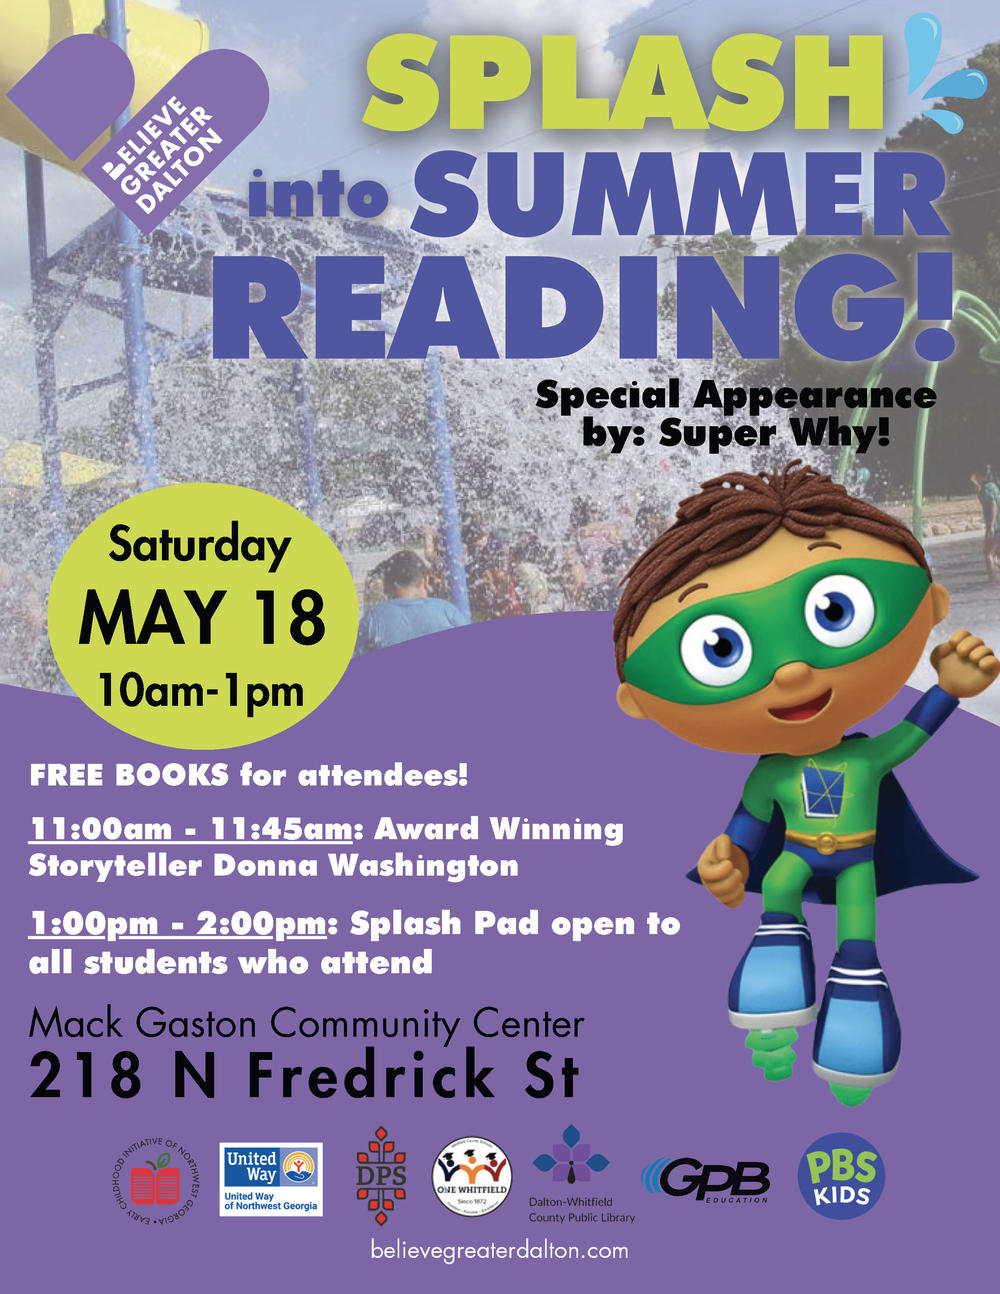 Splash into Summer Reading! Special Appearance by Super Why!